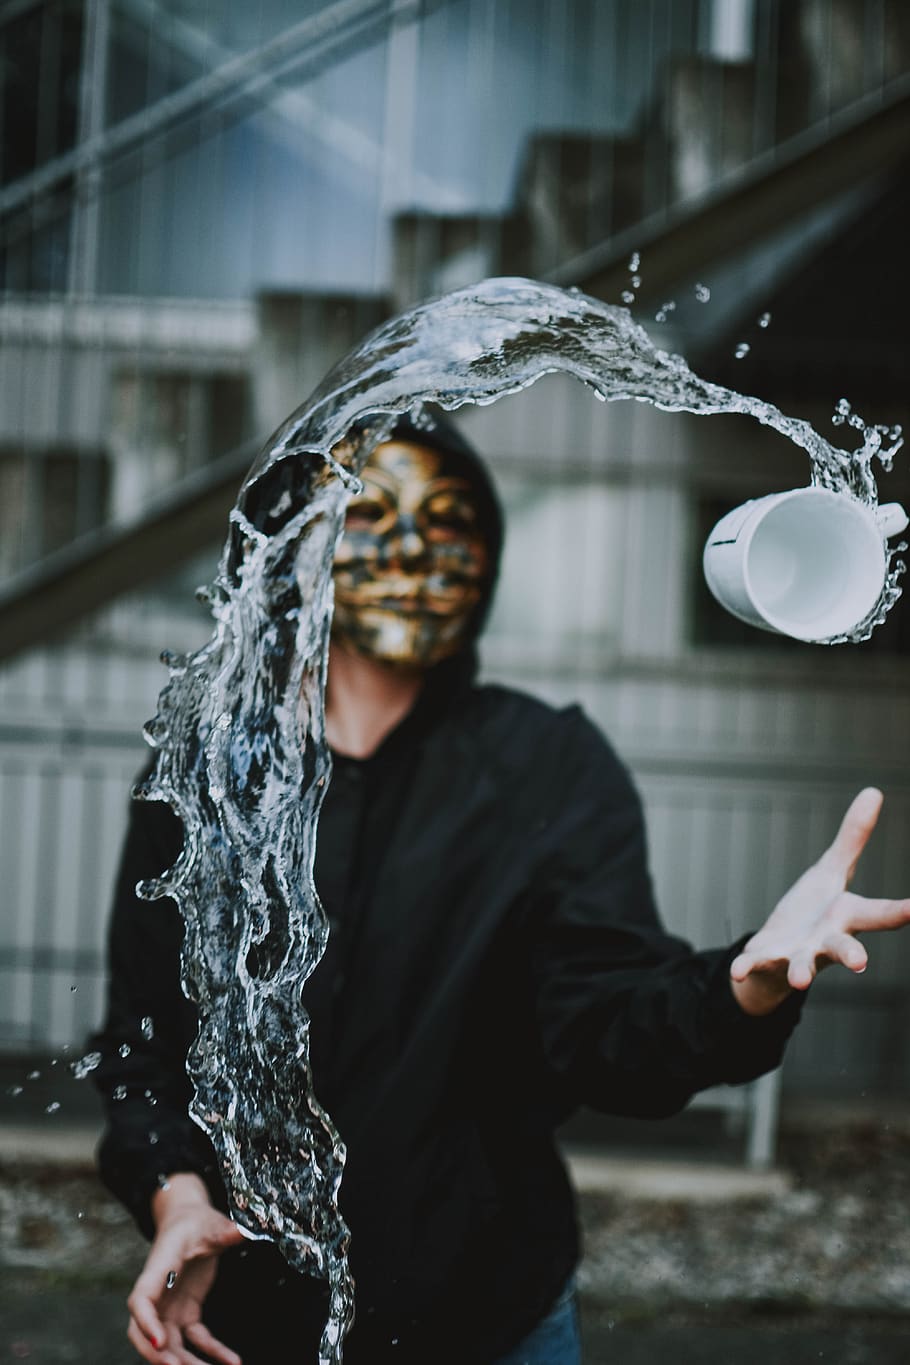 moment, water, throw, cup, mask, real people, architecture, motion, built structure, one person